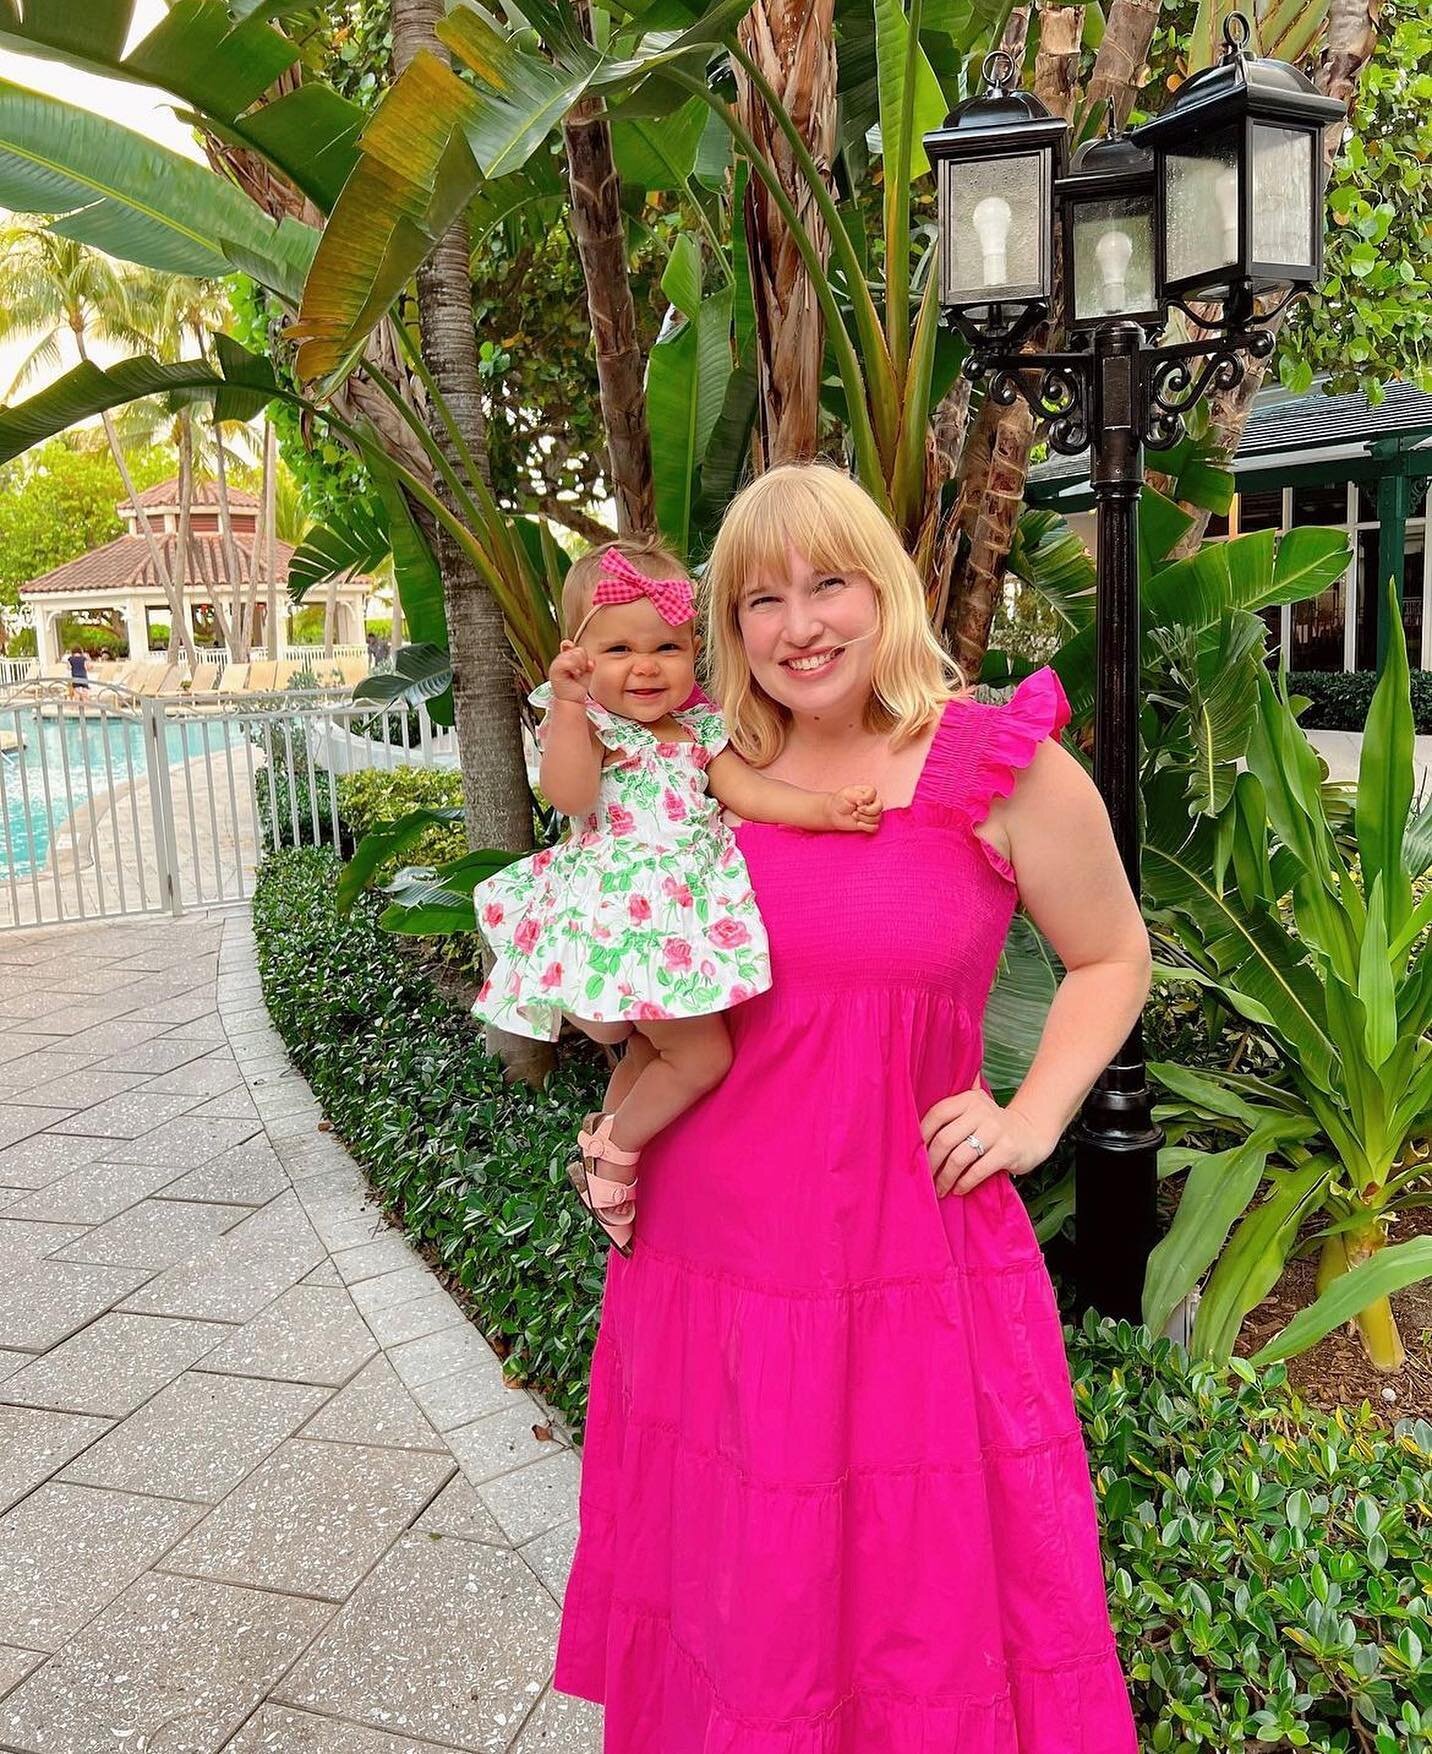 🌸Happy Mother&rsquo;s Day!🌸 Being Isabella&rsquo;s mom is the most fun and joyful job I&rsquo;ve ever had and I can&rsquo;t believe I&rsquo;m lucky enough to get to do it (and in cute mommy &amp; me dresses, too!) 💁🏼&zwj;♀️💕✨

Also sending some 